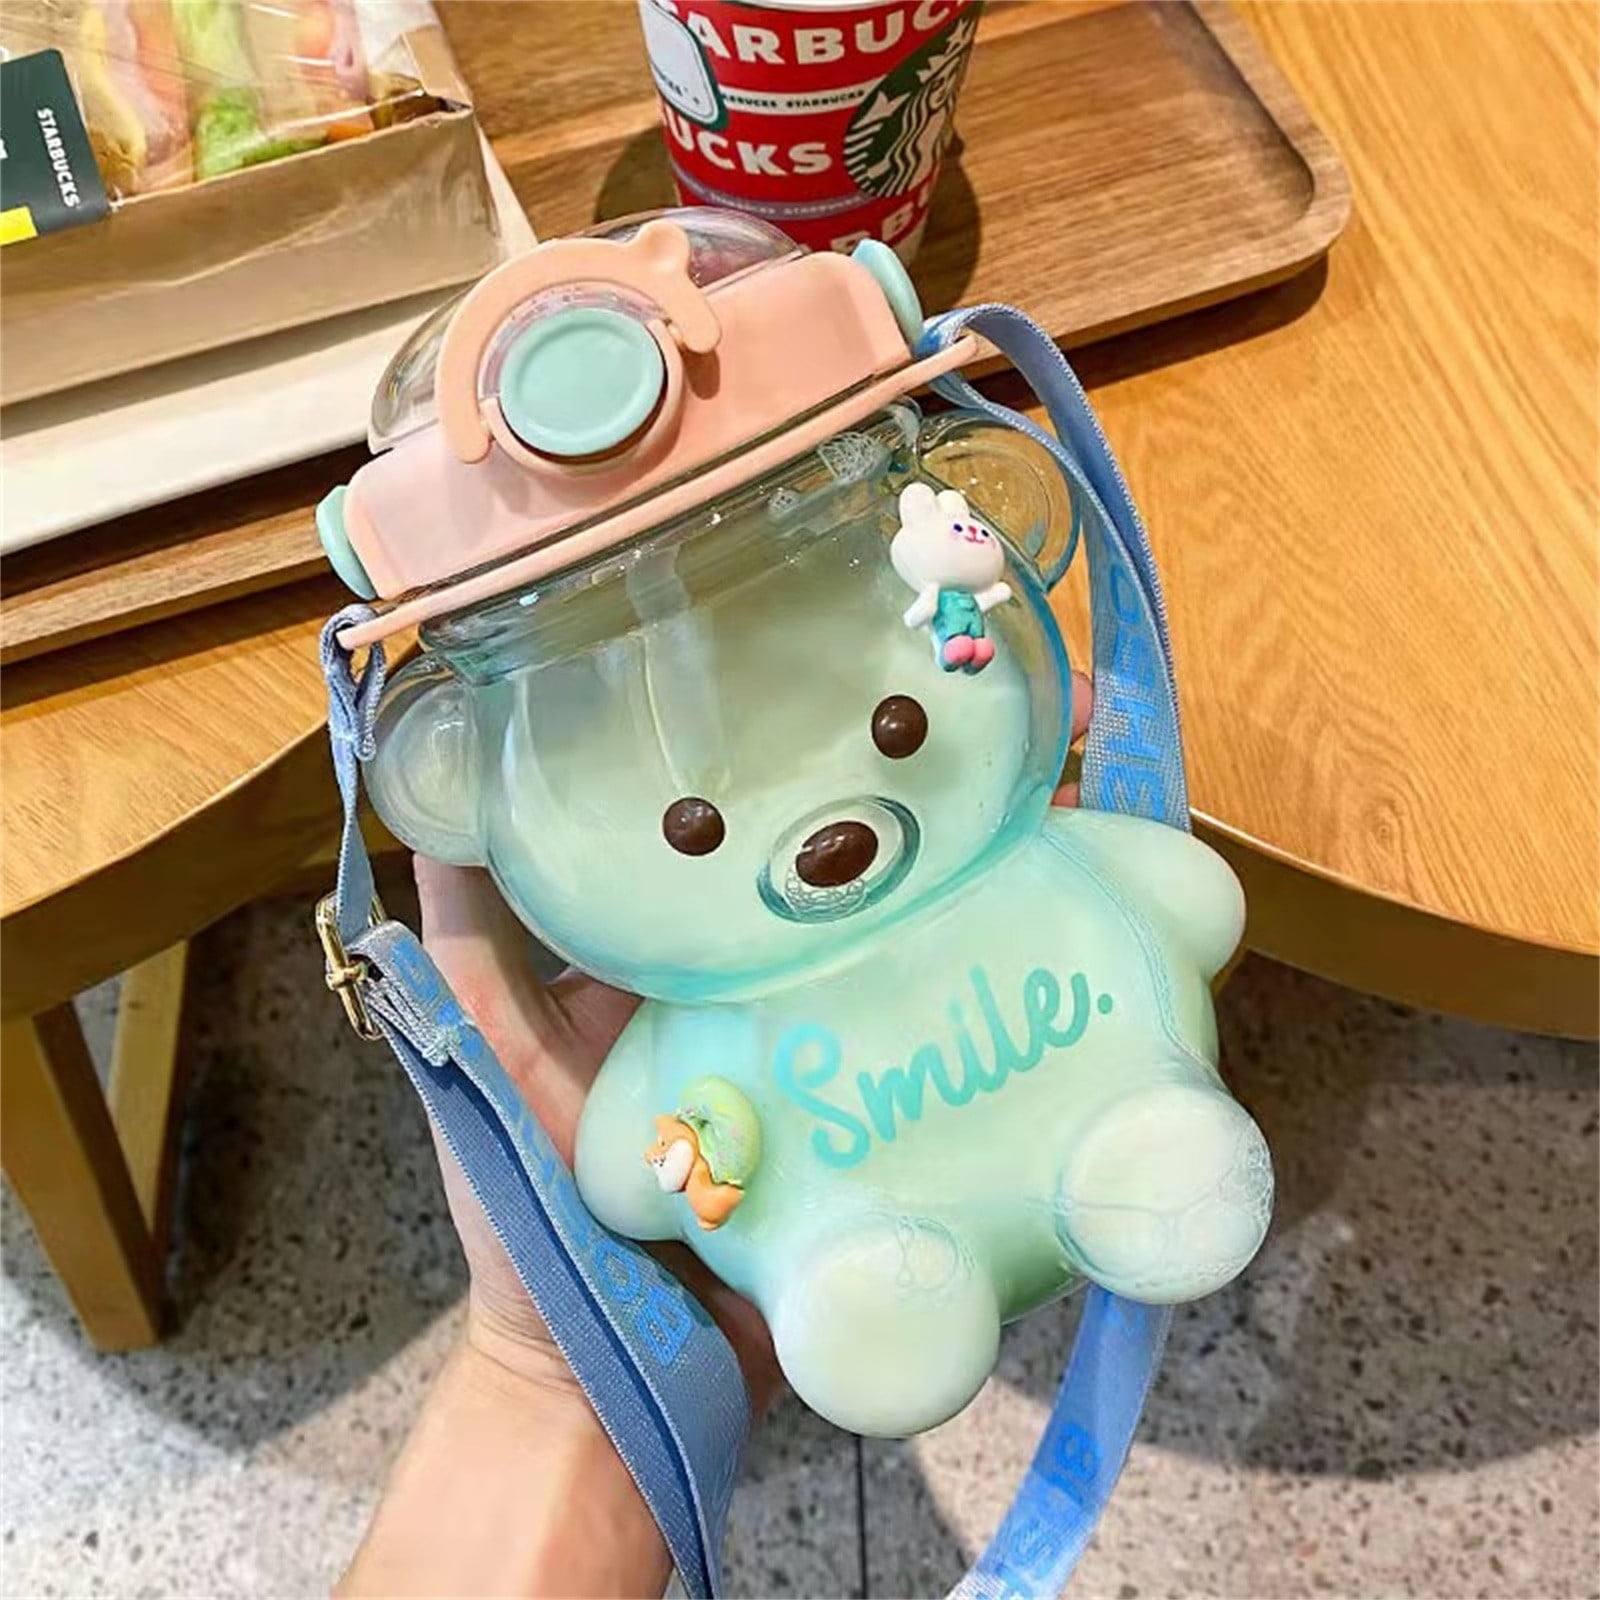 Miniso Bottles 380 ML Kawaii Bear Thermo Bottle For Kids Girl School Women  Stainless Steel Insulated Cup With Straw Cute Thermal Miniso Bottles 230320  From Kong09, $13.02